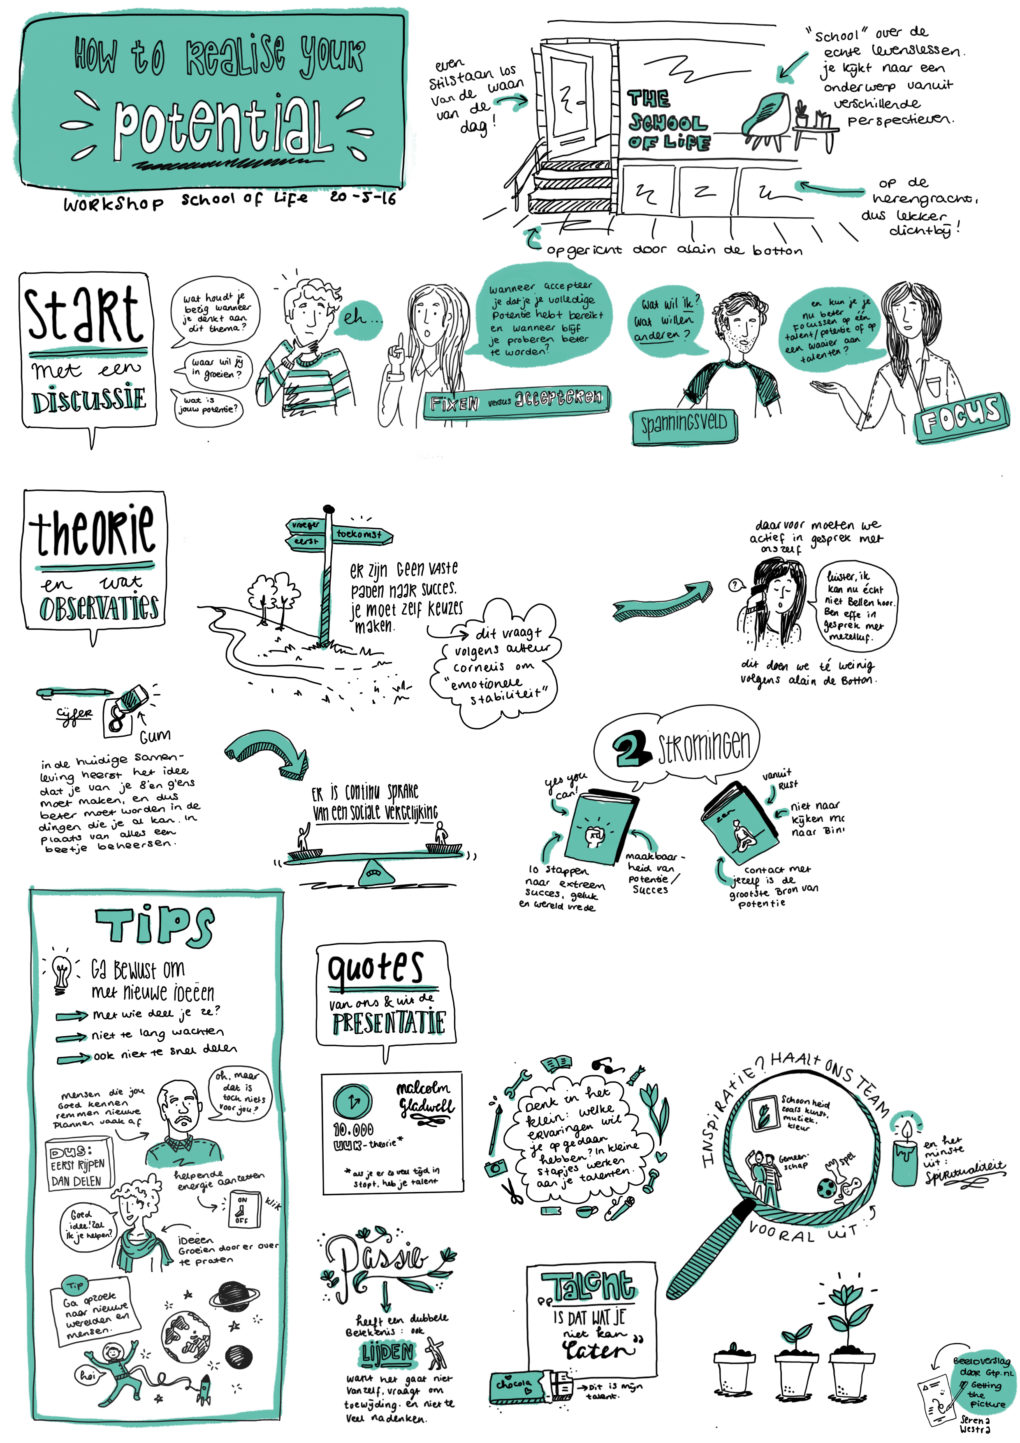 Beeldverslag visual notes live tekenen - How to realise your potential